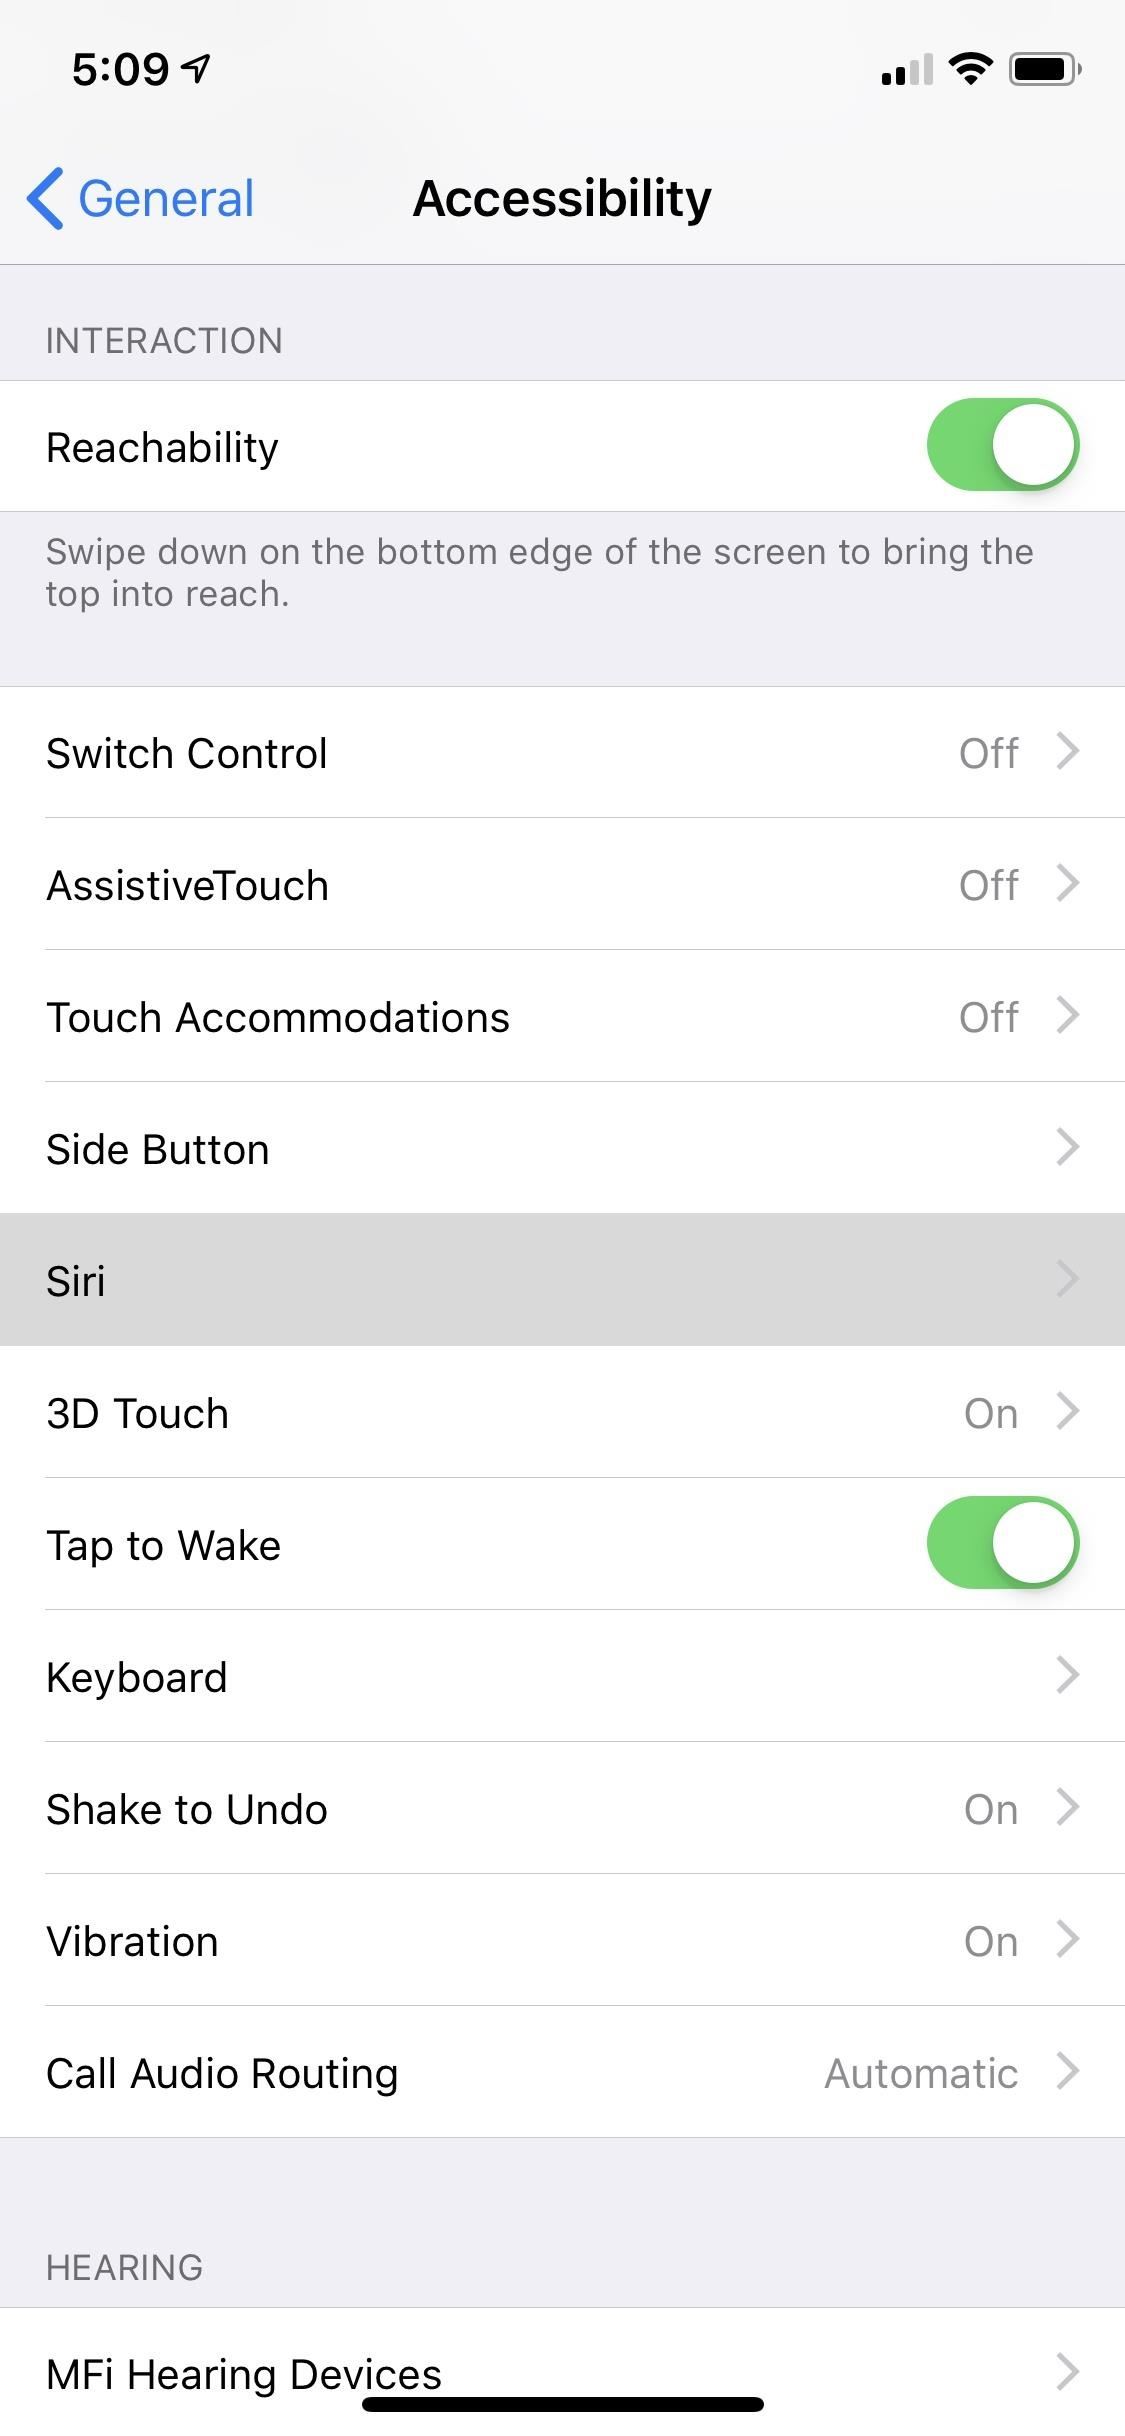 How to Type to Siri on Your iPhone When You Don't Want to Talk